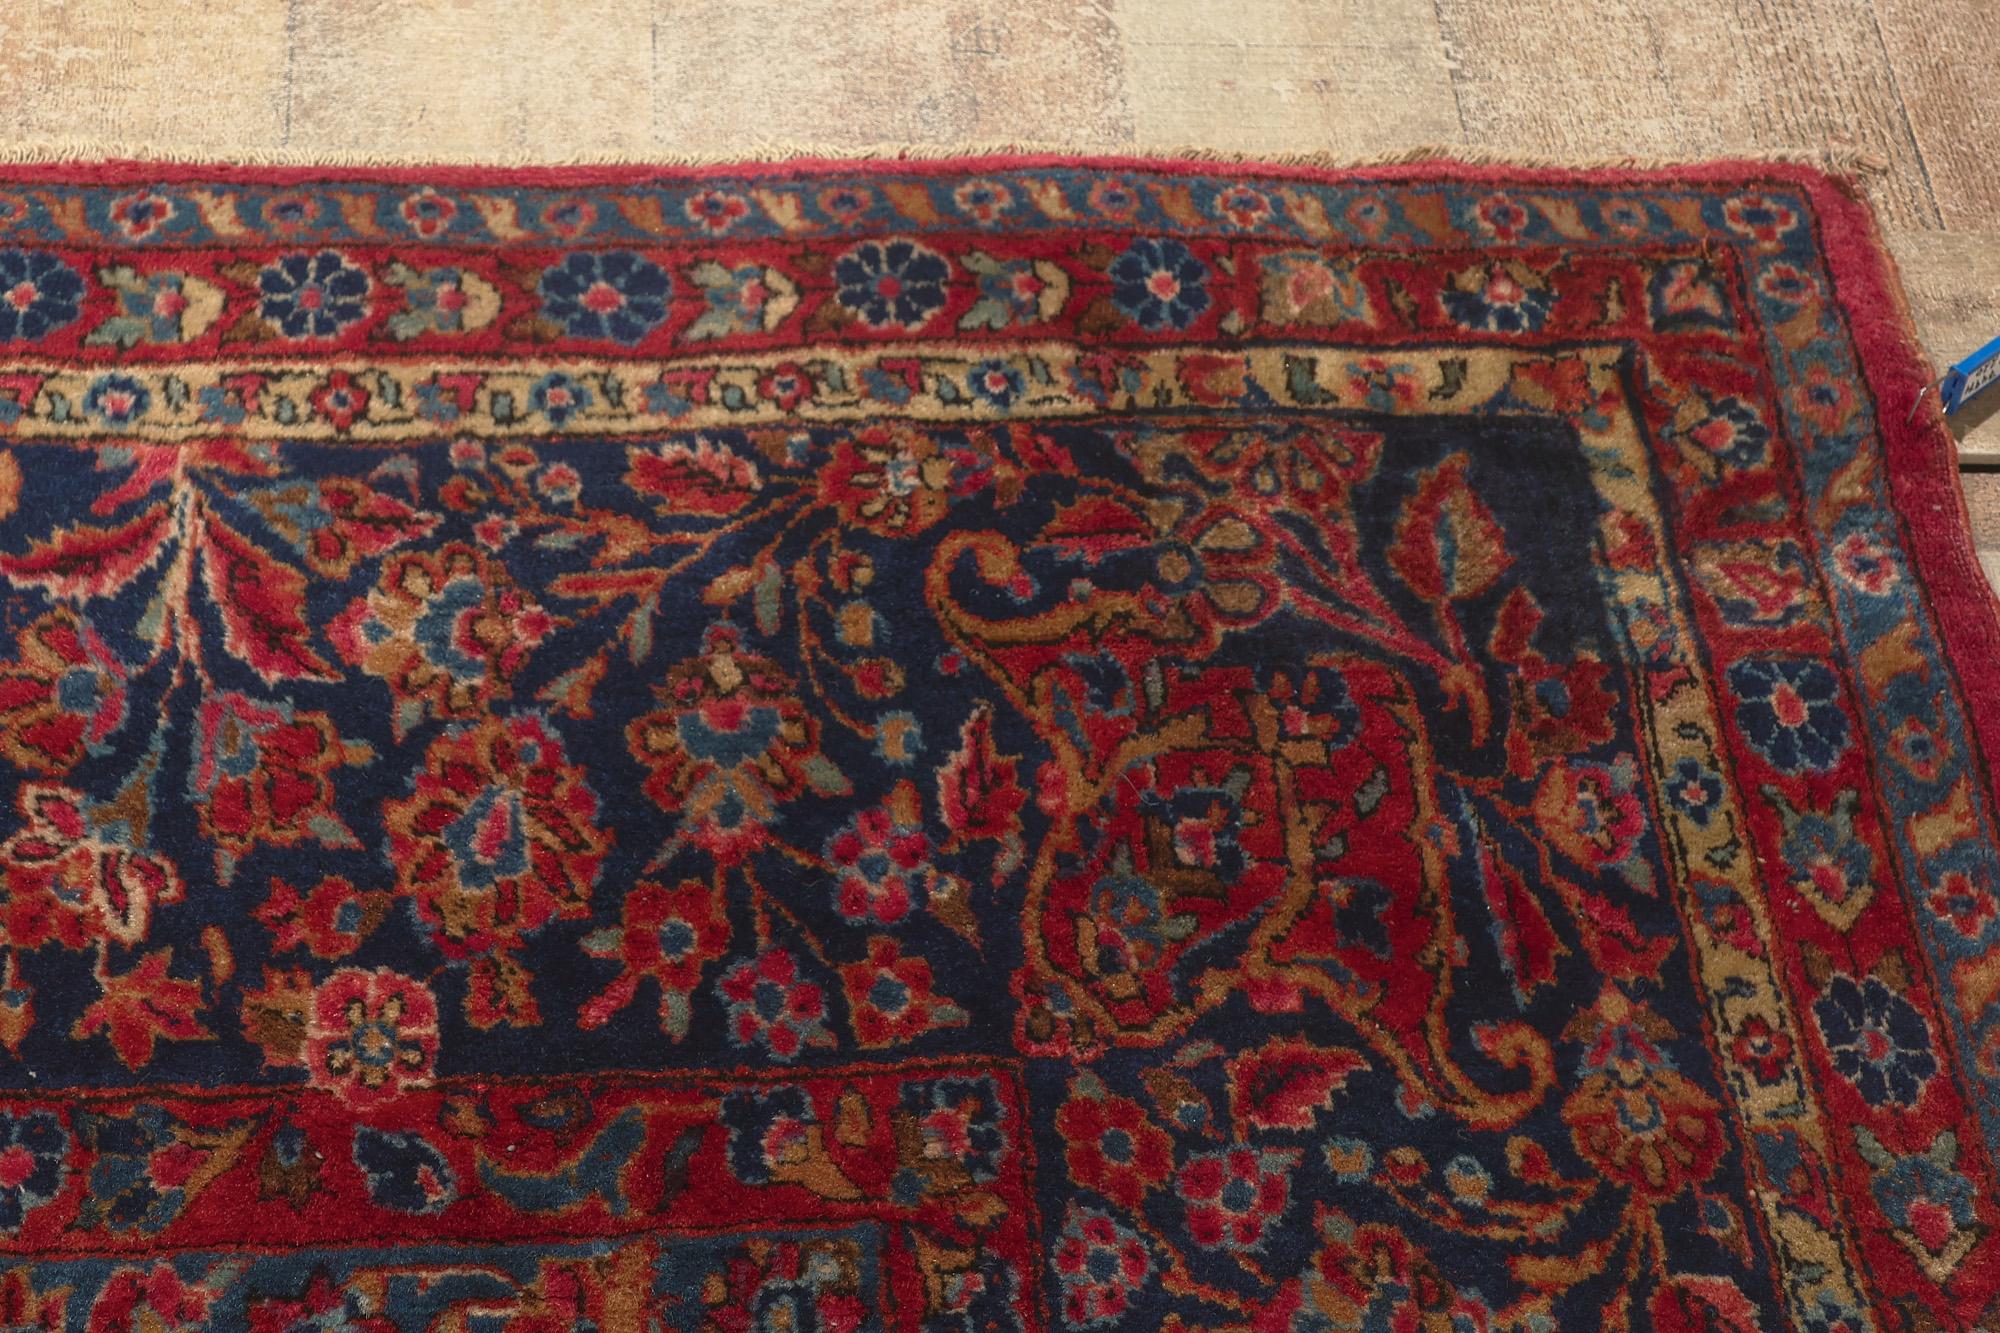 Antique Persian Kashan Rug with Art Nouveau Style in Rich Jewel Tones 5